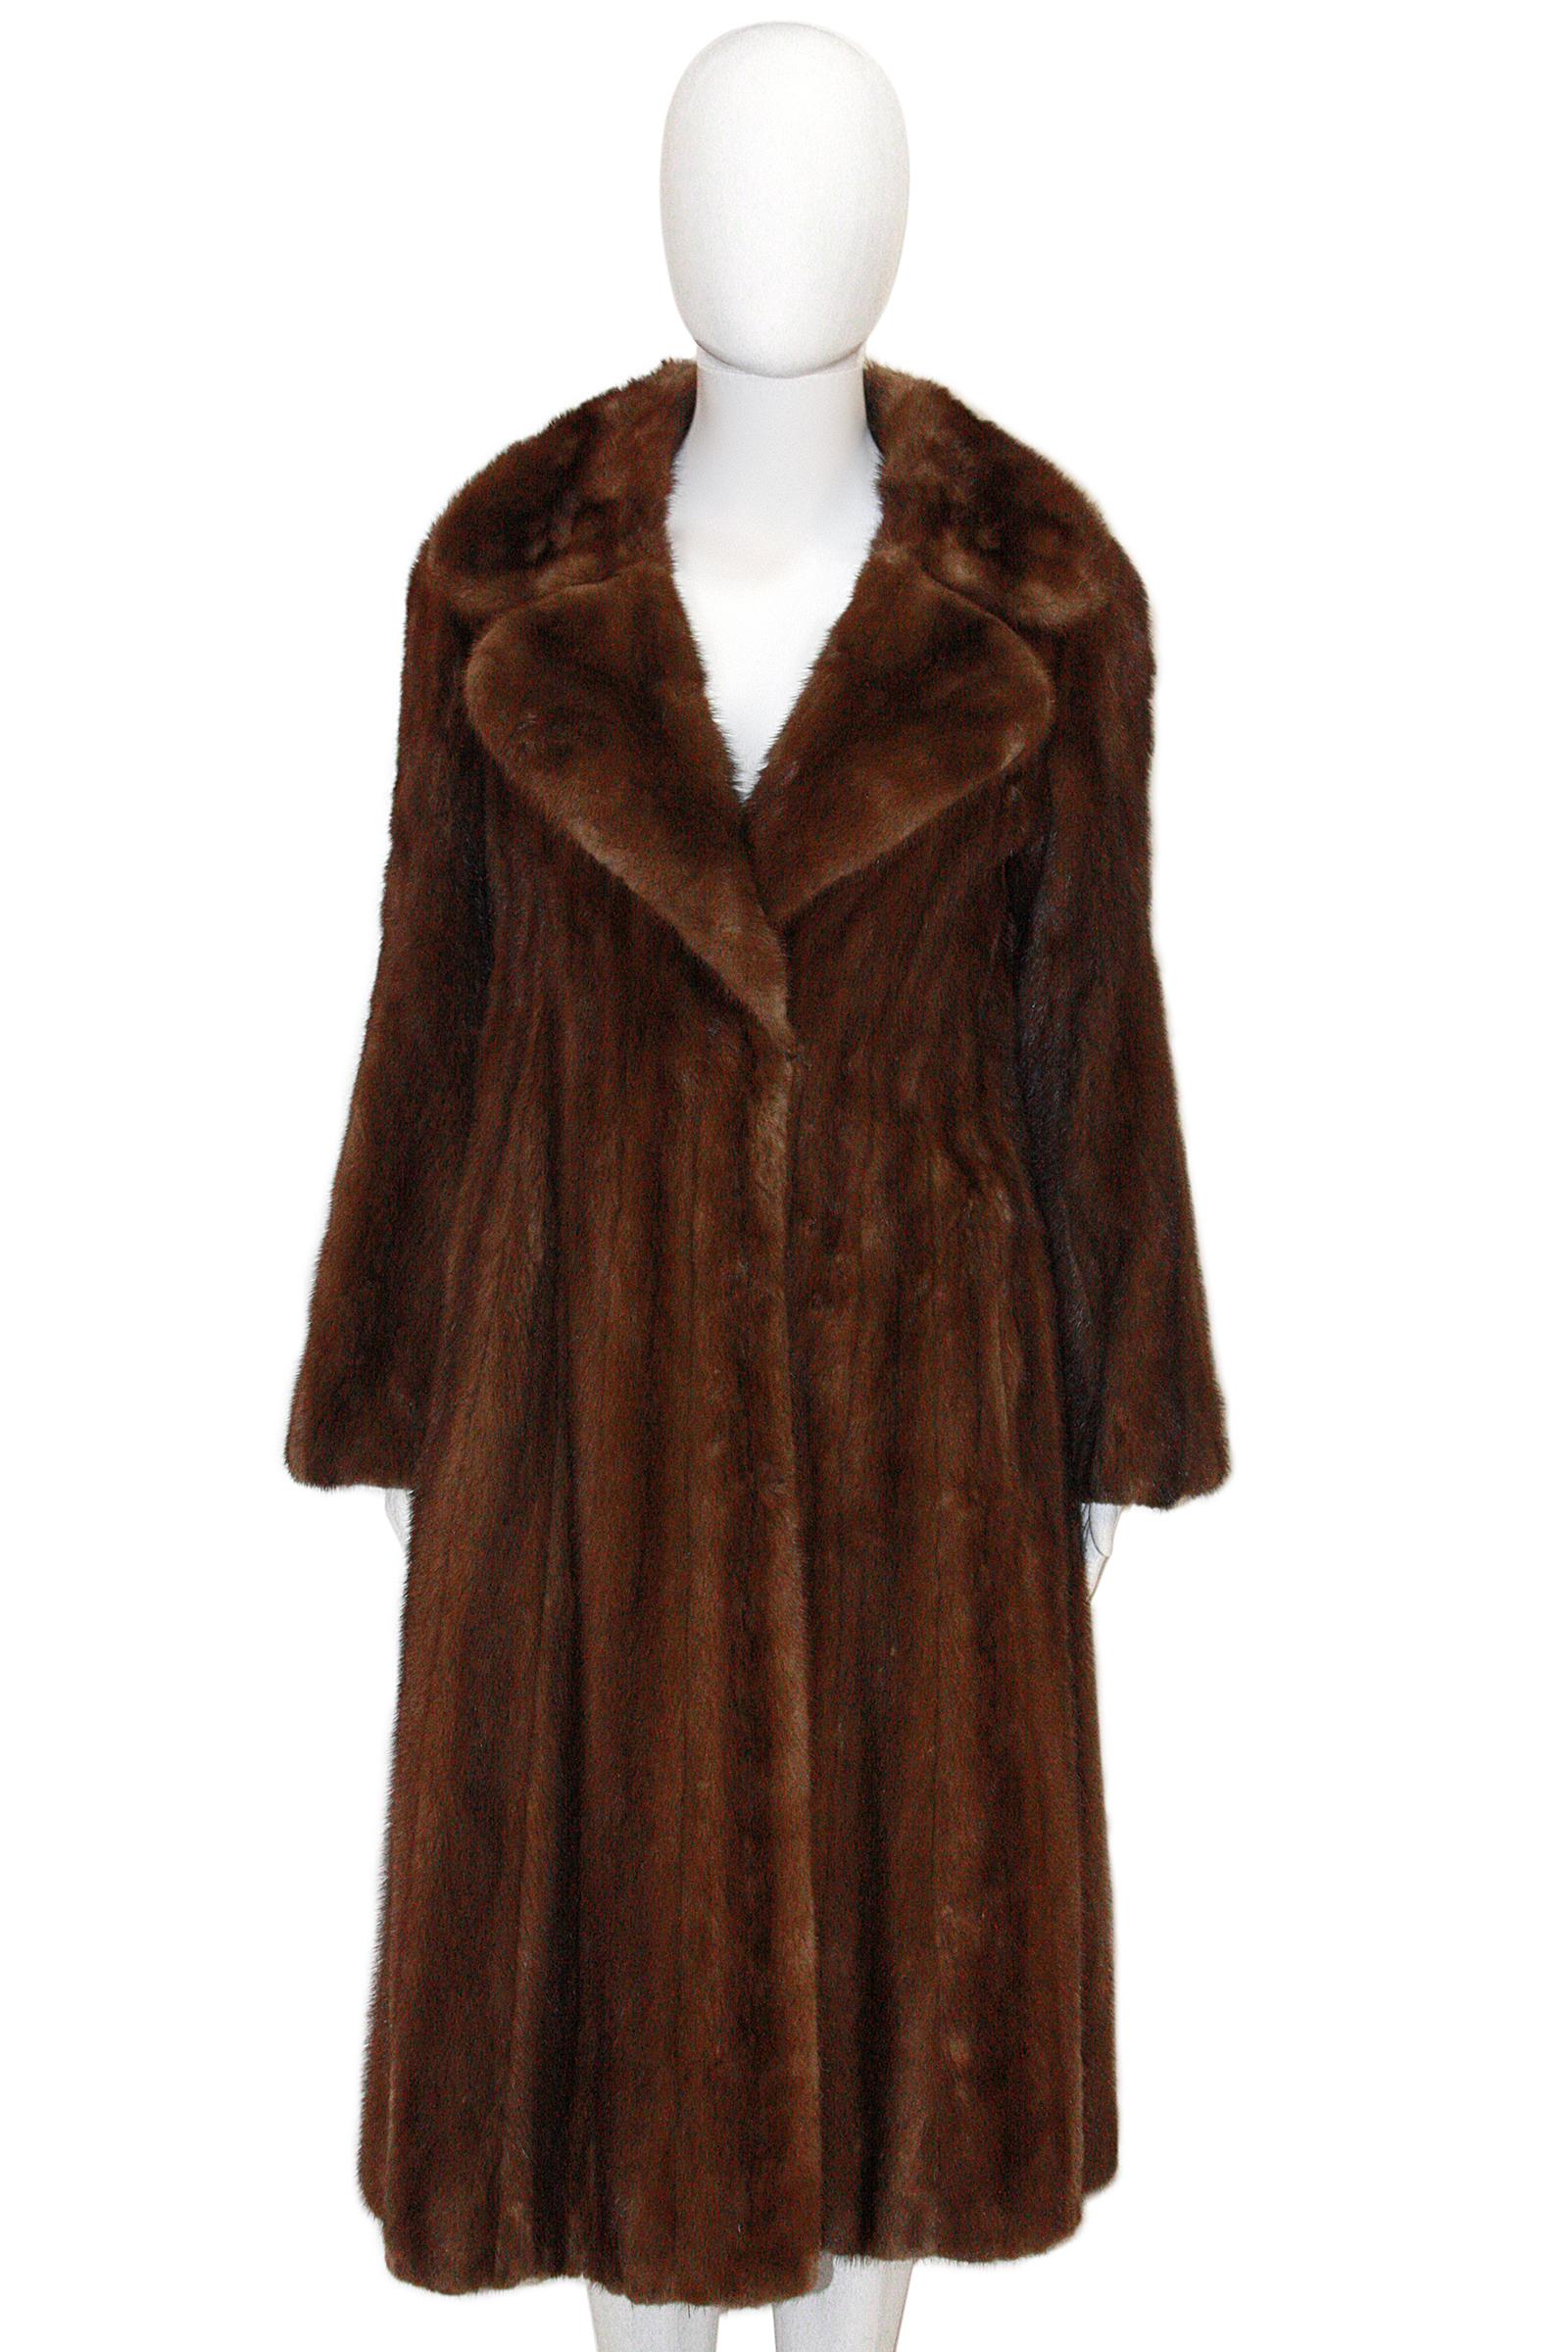 NORMAN NORELL for MICHAEL FORREST of New York, Vintage natural mink fur coat from the 1970s
Tapered arms with Flared cuffs  
Midi-length 
Tapered body and Flared hemline
Brown hook closures 
Brown patterned silk lining 
Made by Norell for Michael